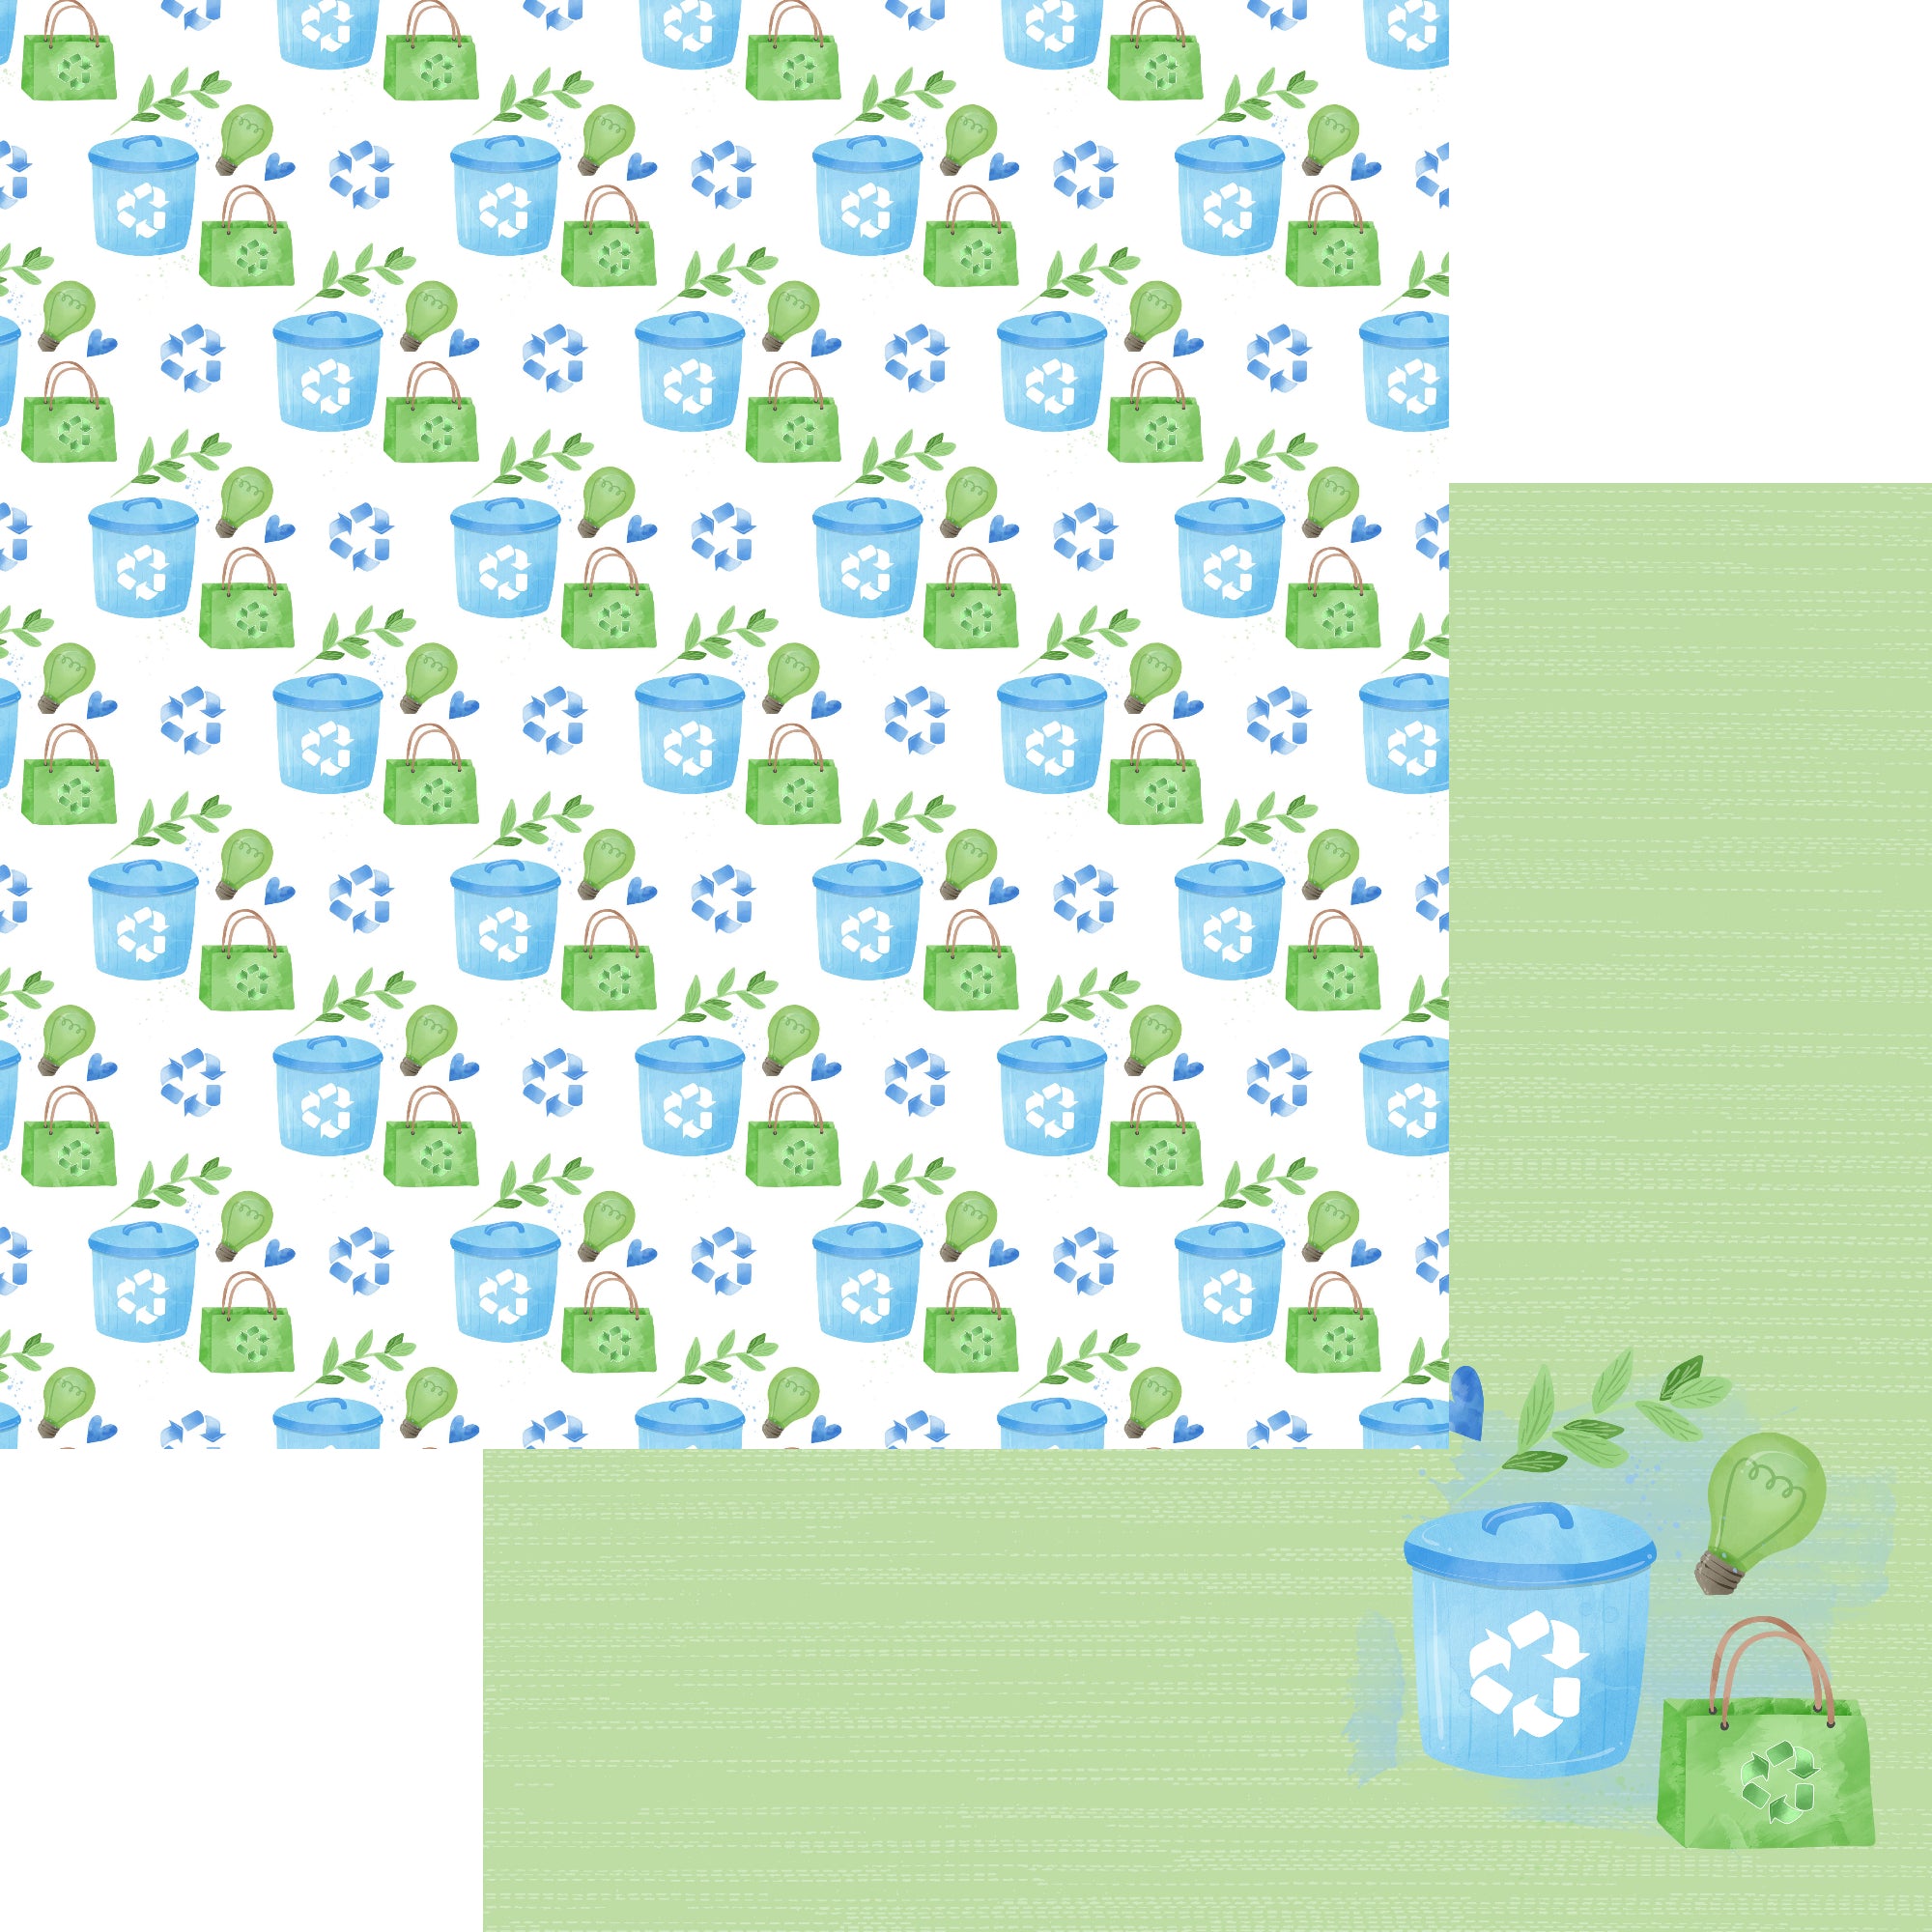 Earth Day Collection Please Recycle 12 x 12 Double-Sided Scrapbook Paper by SSC Designs